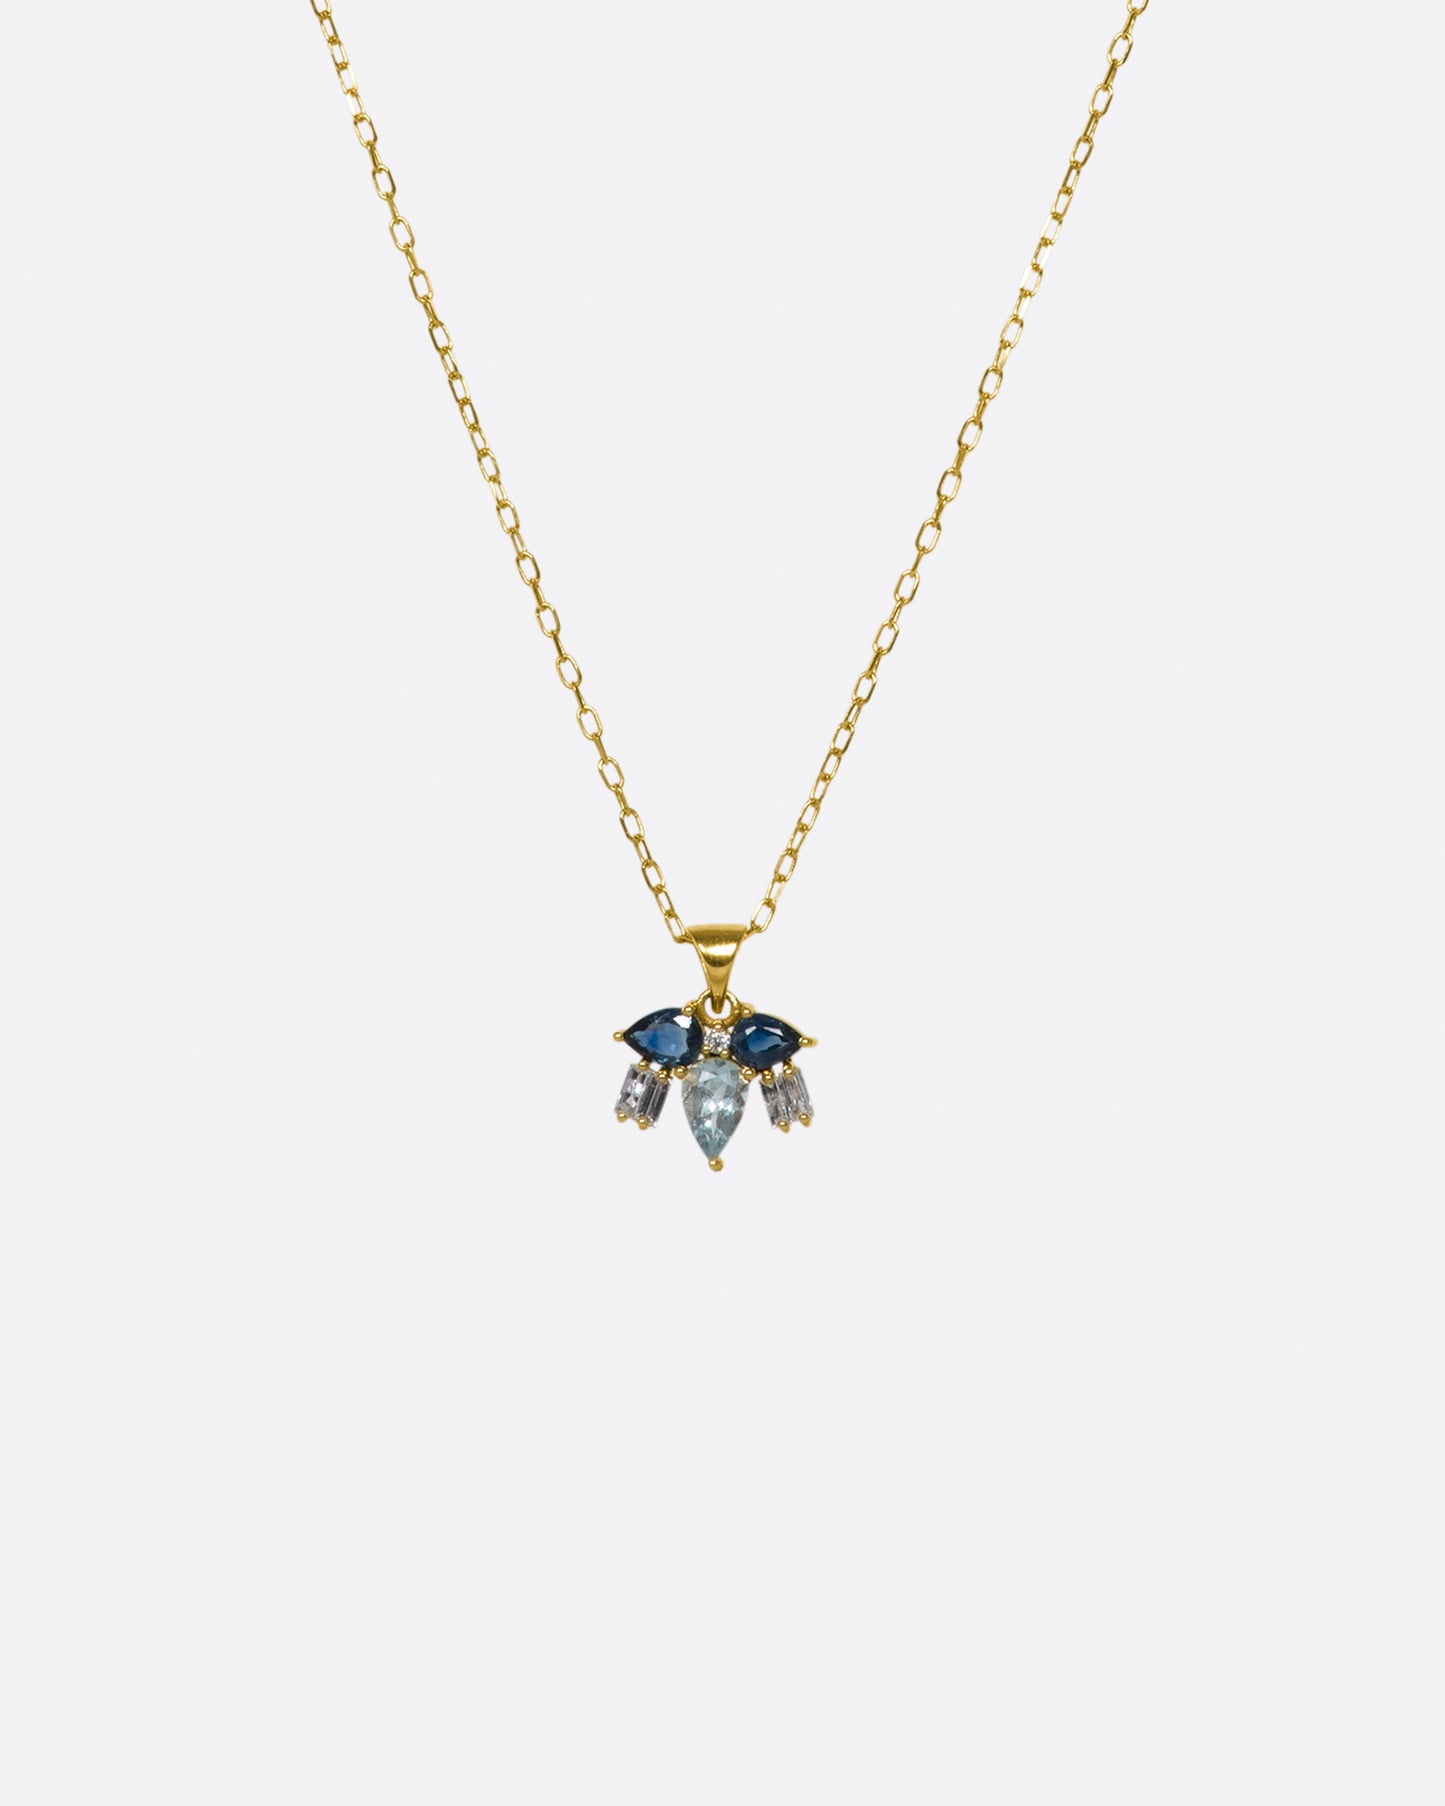 A little butterfly, or maybe a moth, made from pear shaped stones and diamond accents.